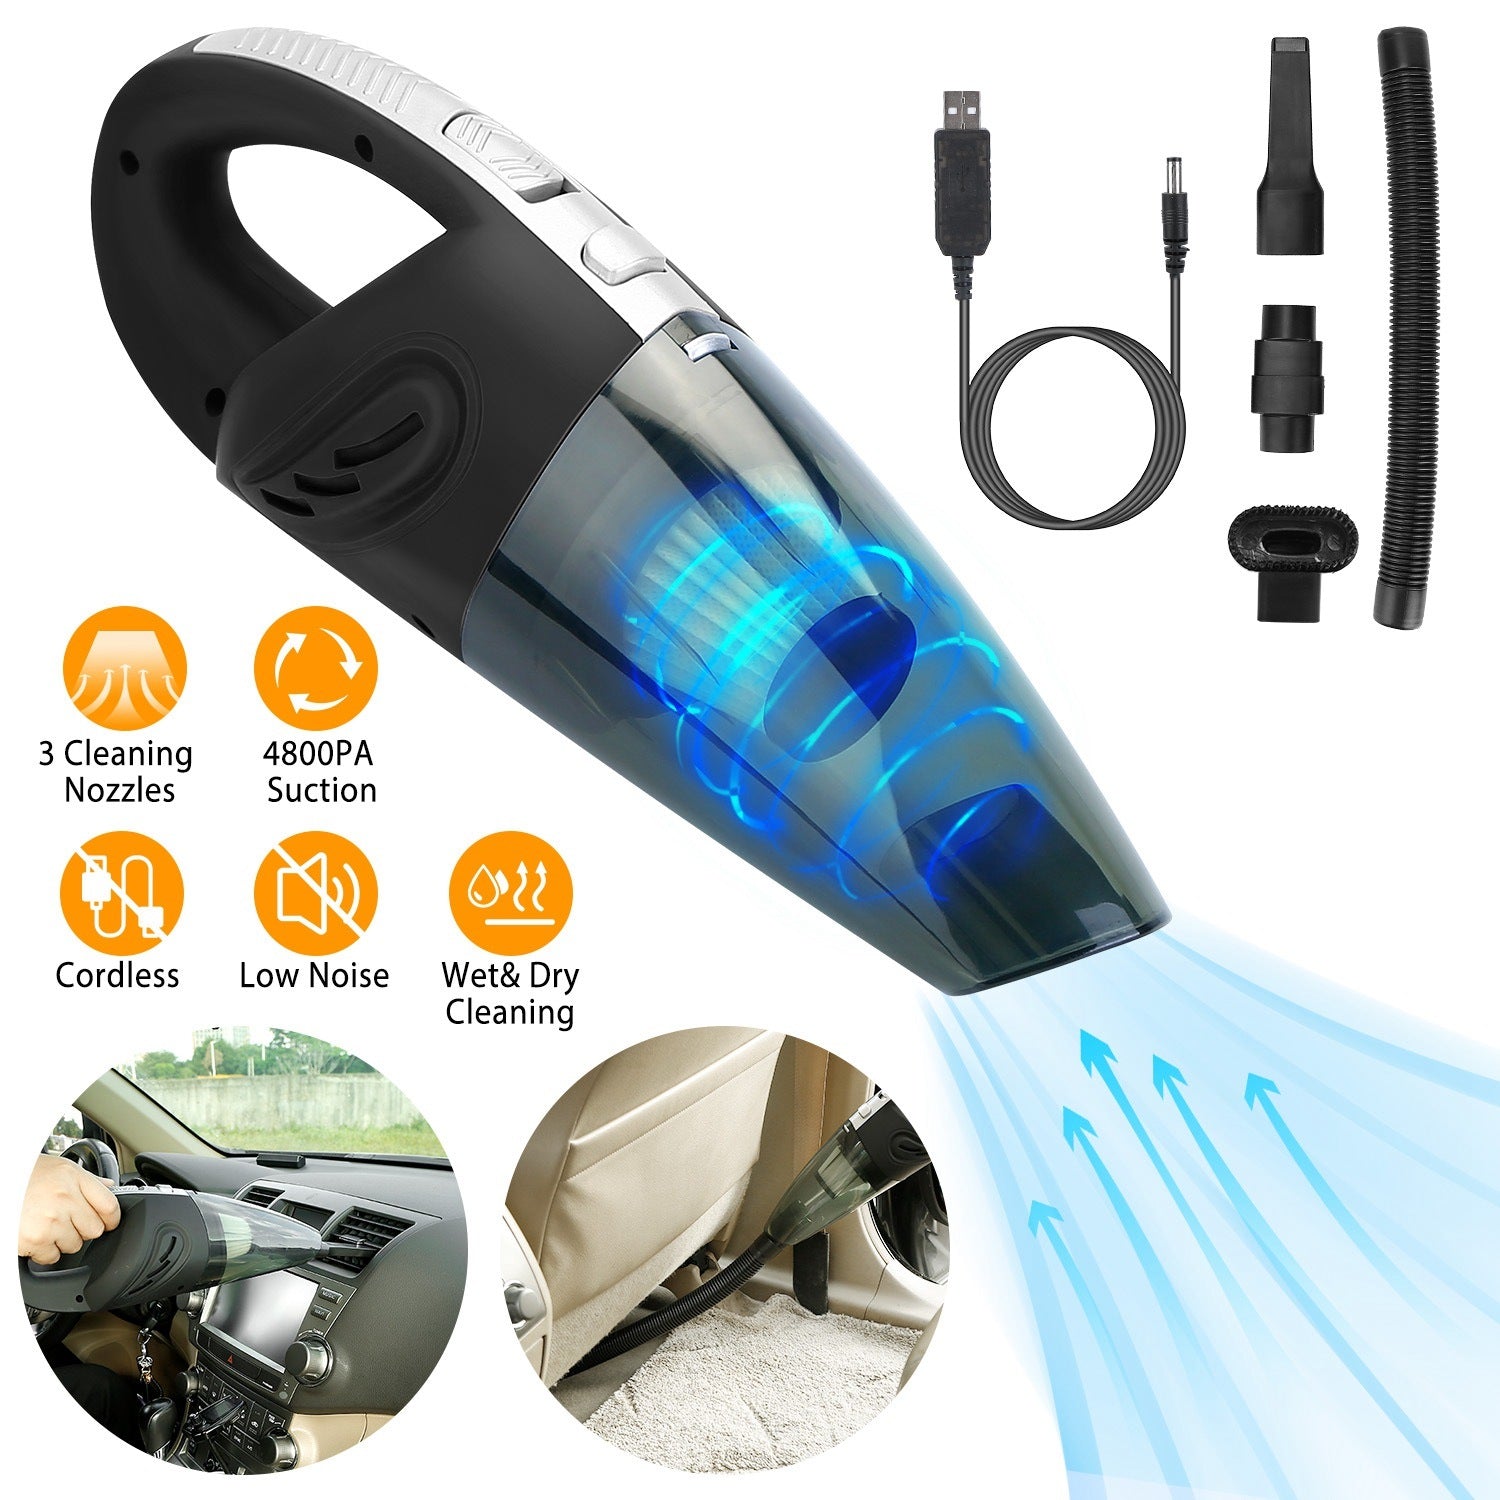 Portable Cordless Handheld Car Vacuum with Strong Suction